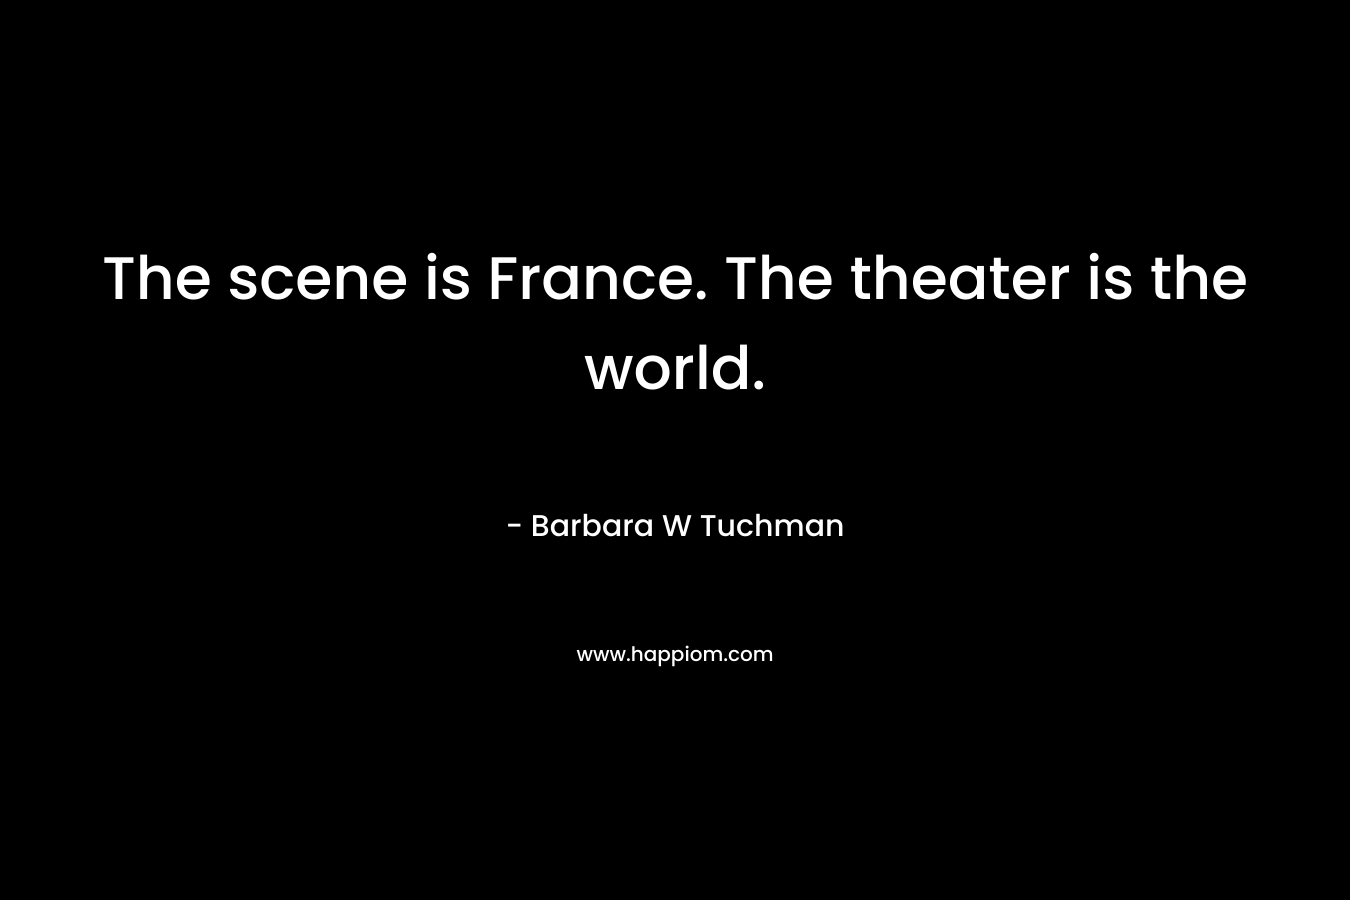 The scene is France. The theater is the world. – Barbara W Tuchman